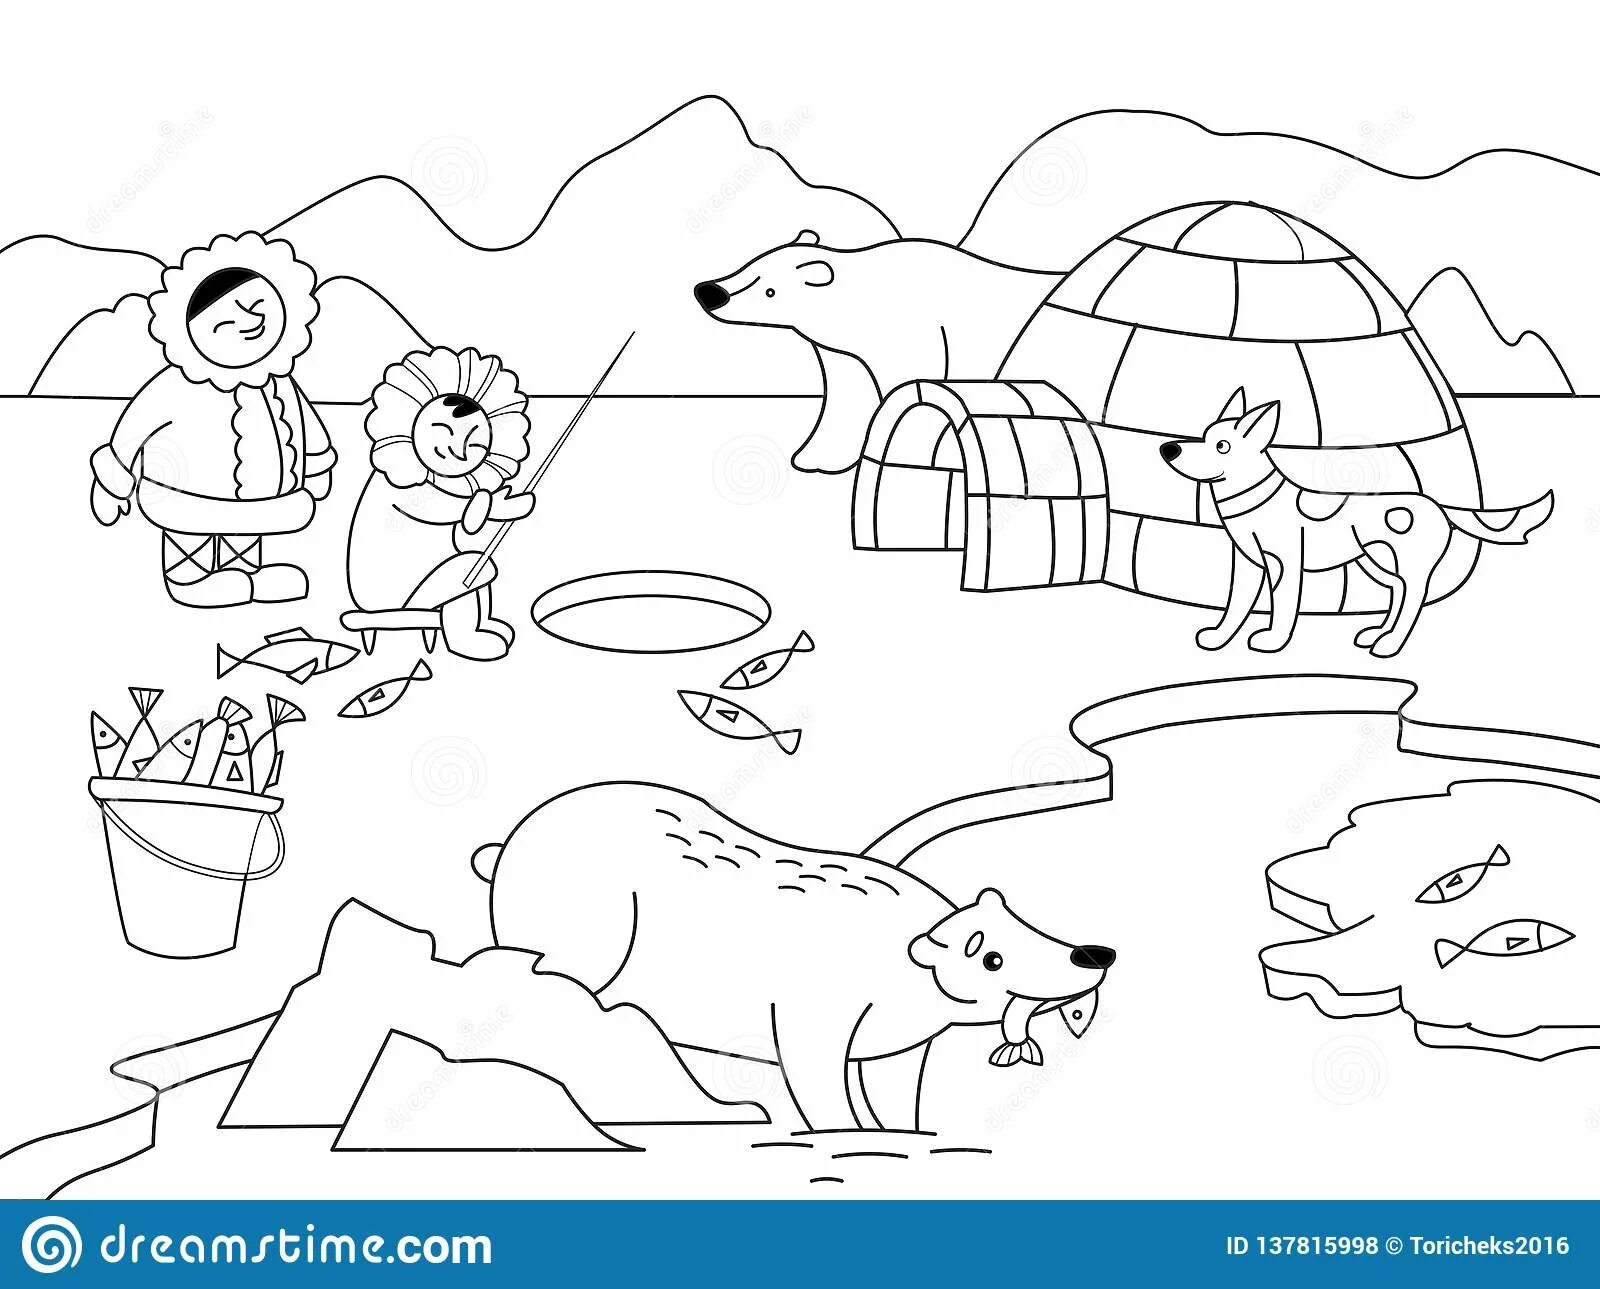 Coloring page graceful arctic foxes climb